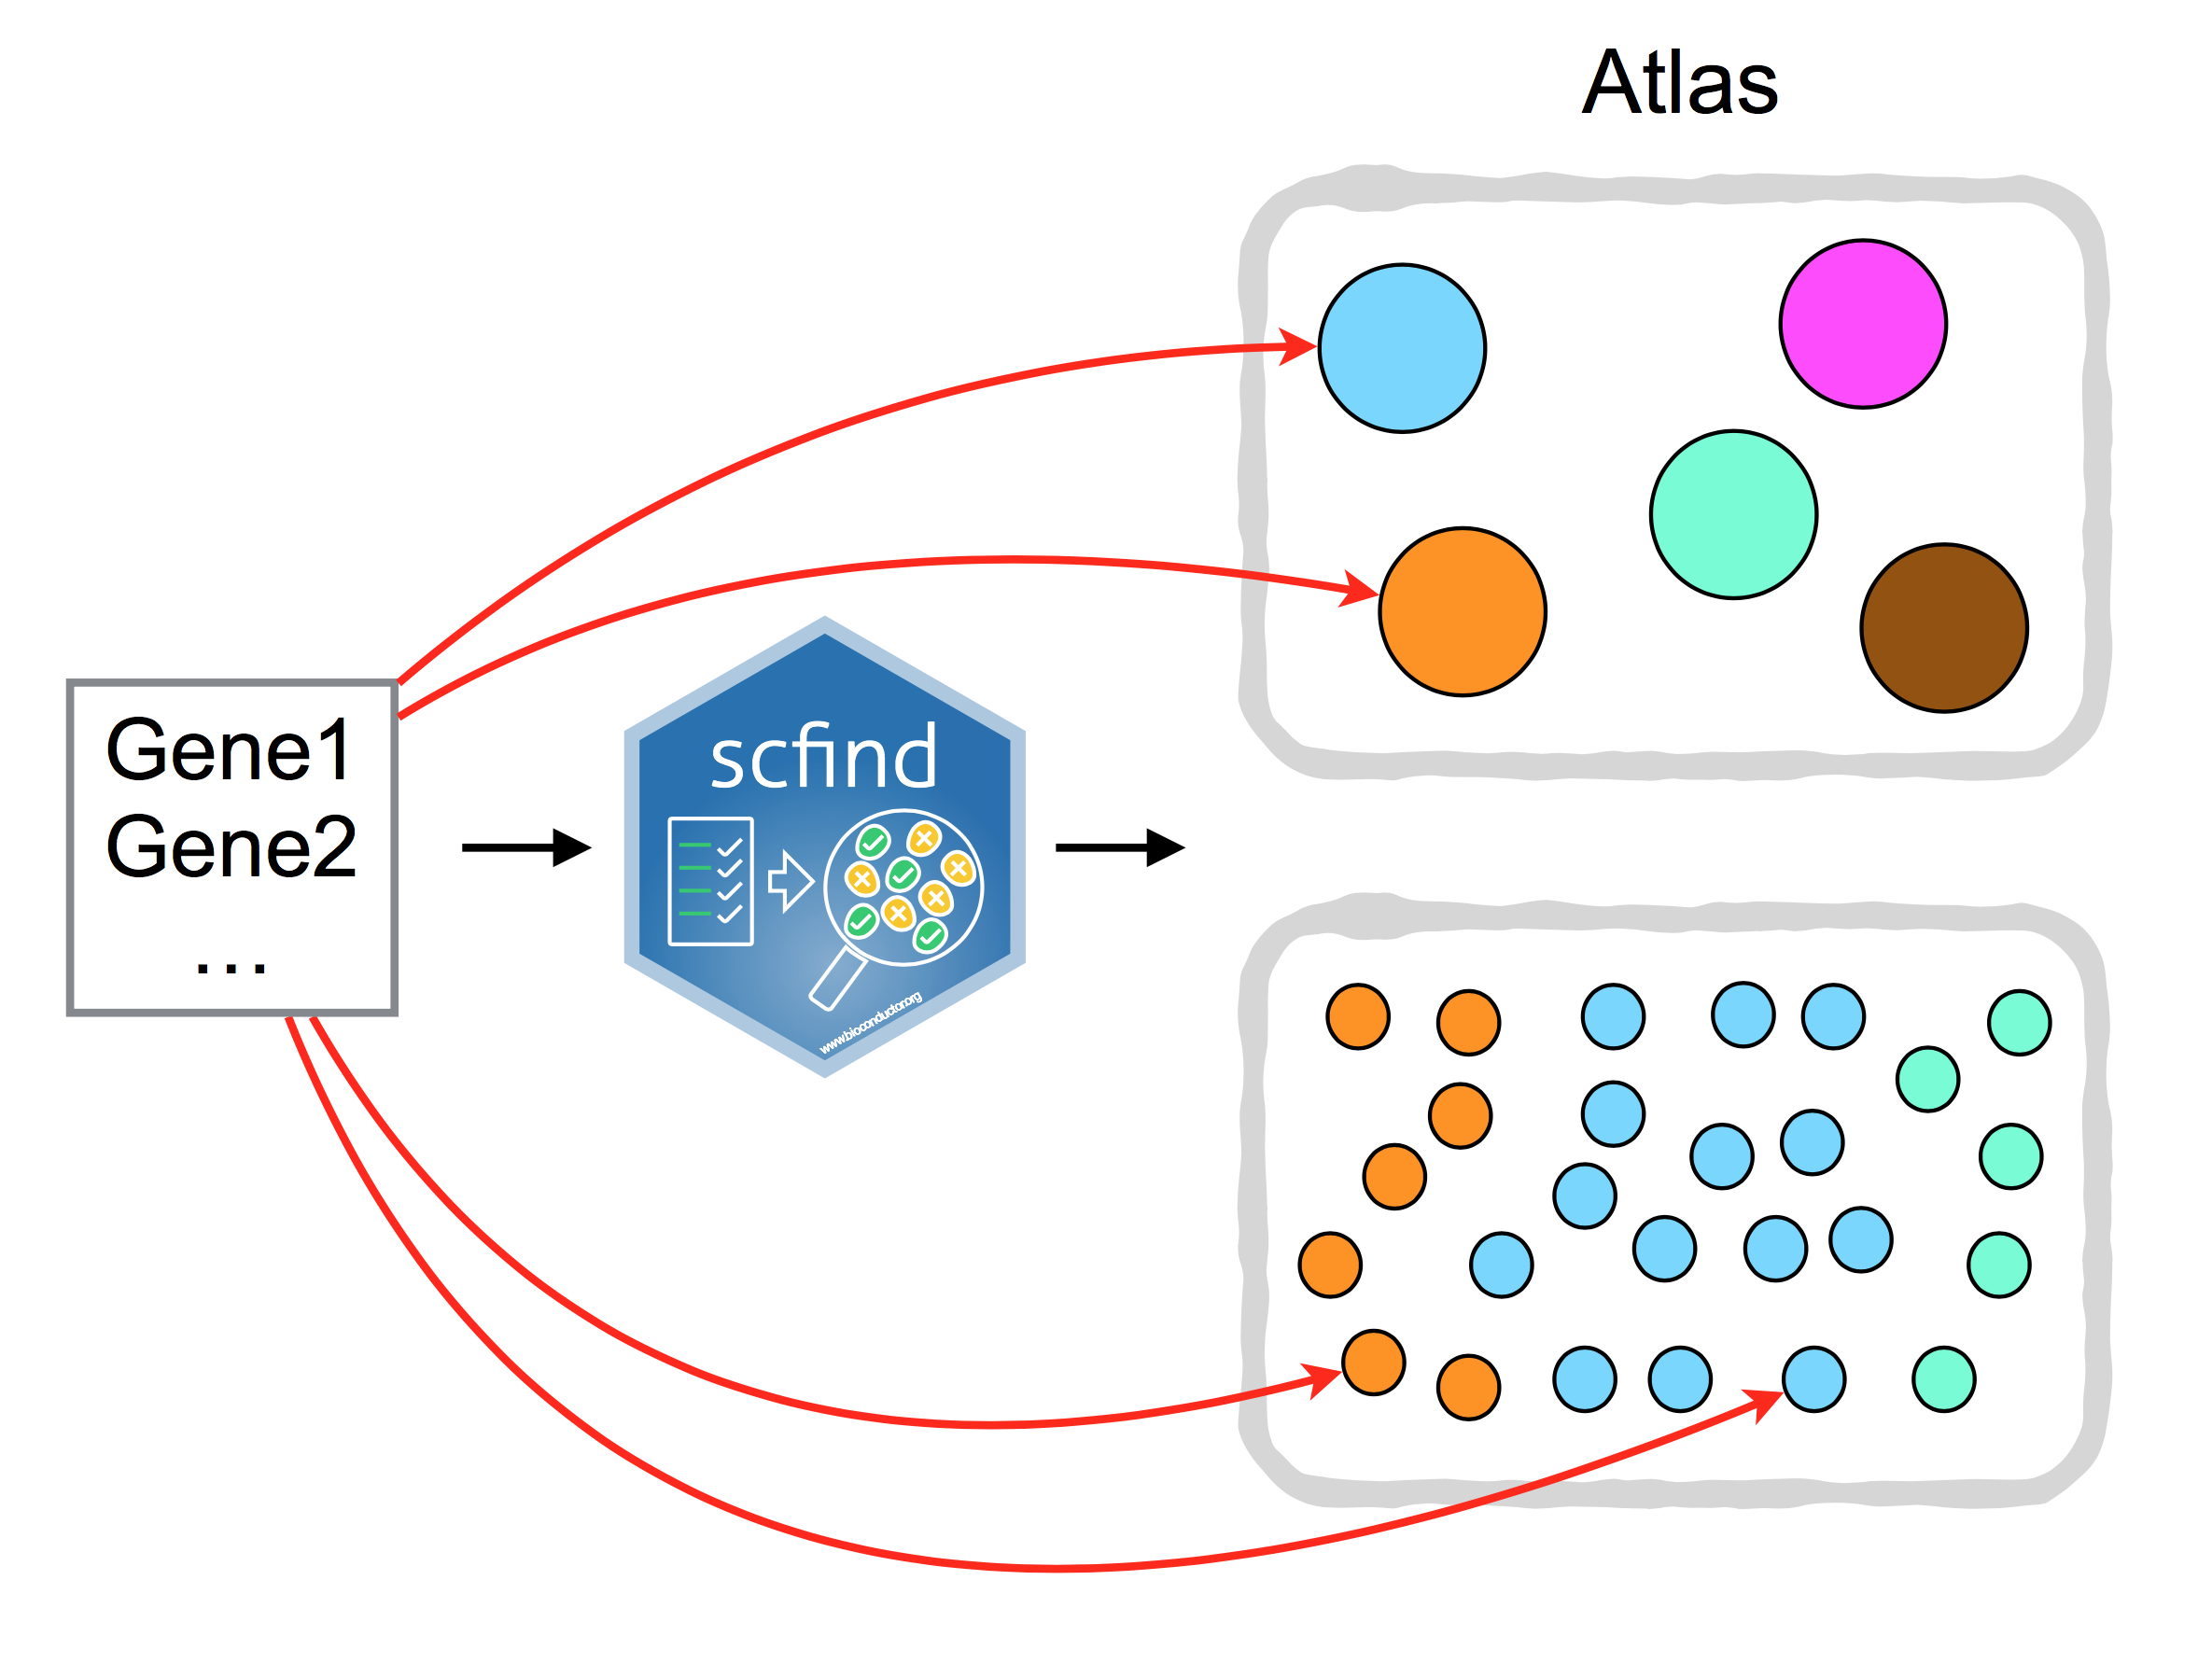 scfind can be used to search large collection of scRNA-seq data by a list of gene IDs.